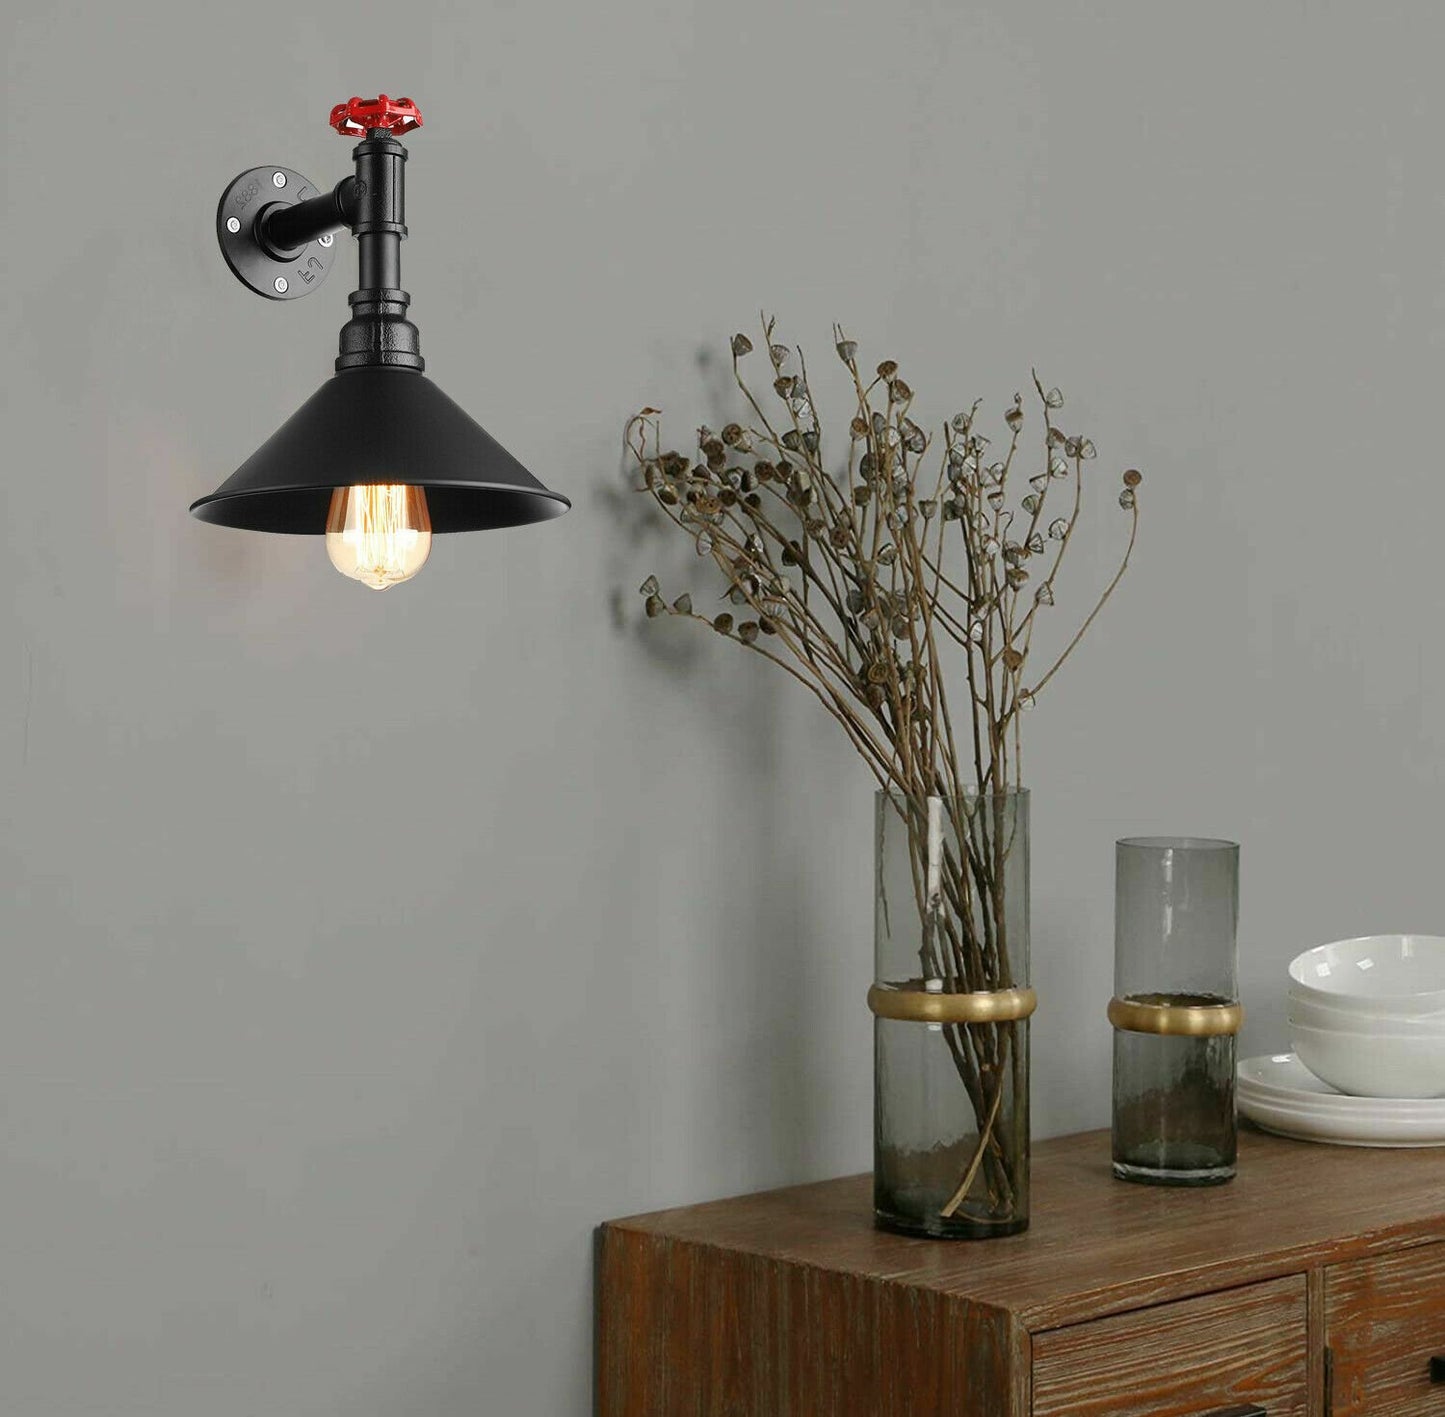 Black Water Pipe  Cone  Wall Sconce Light for hall way.JPG